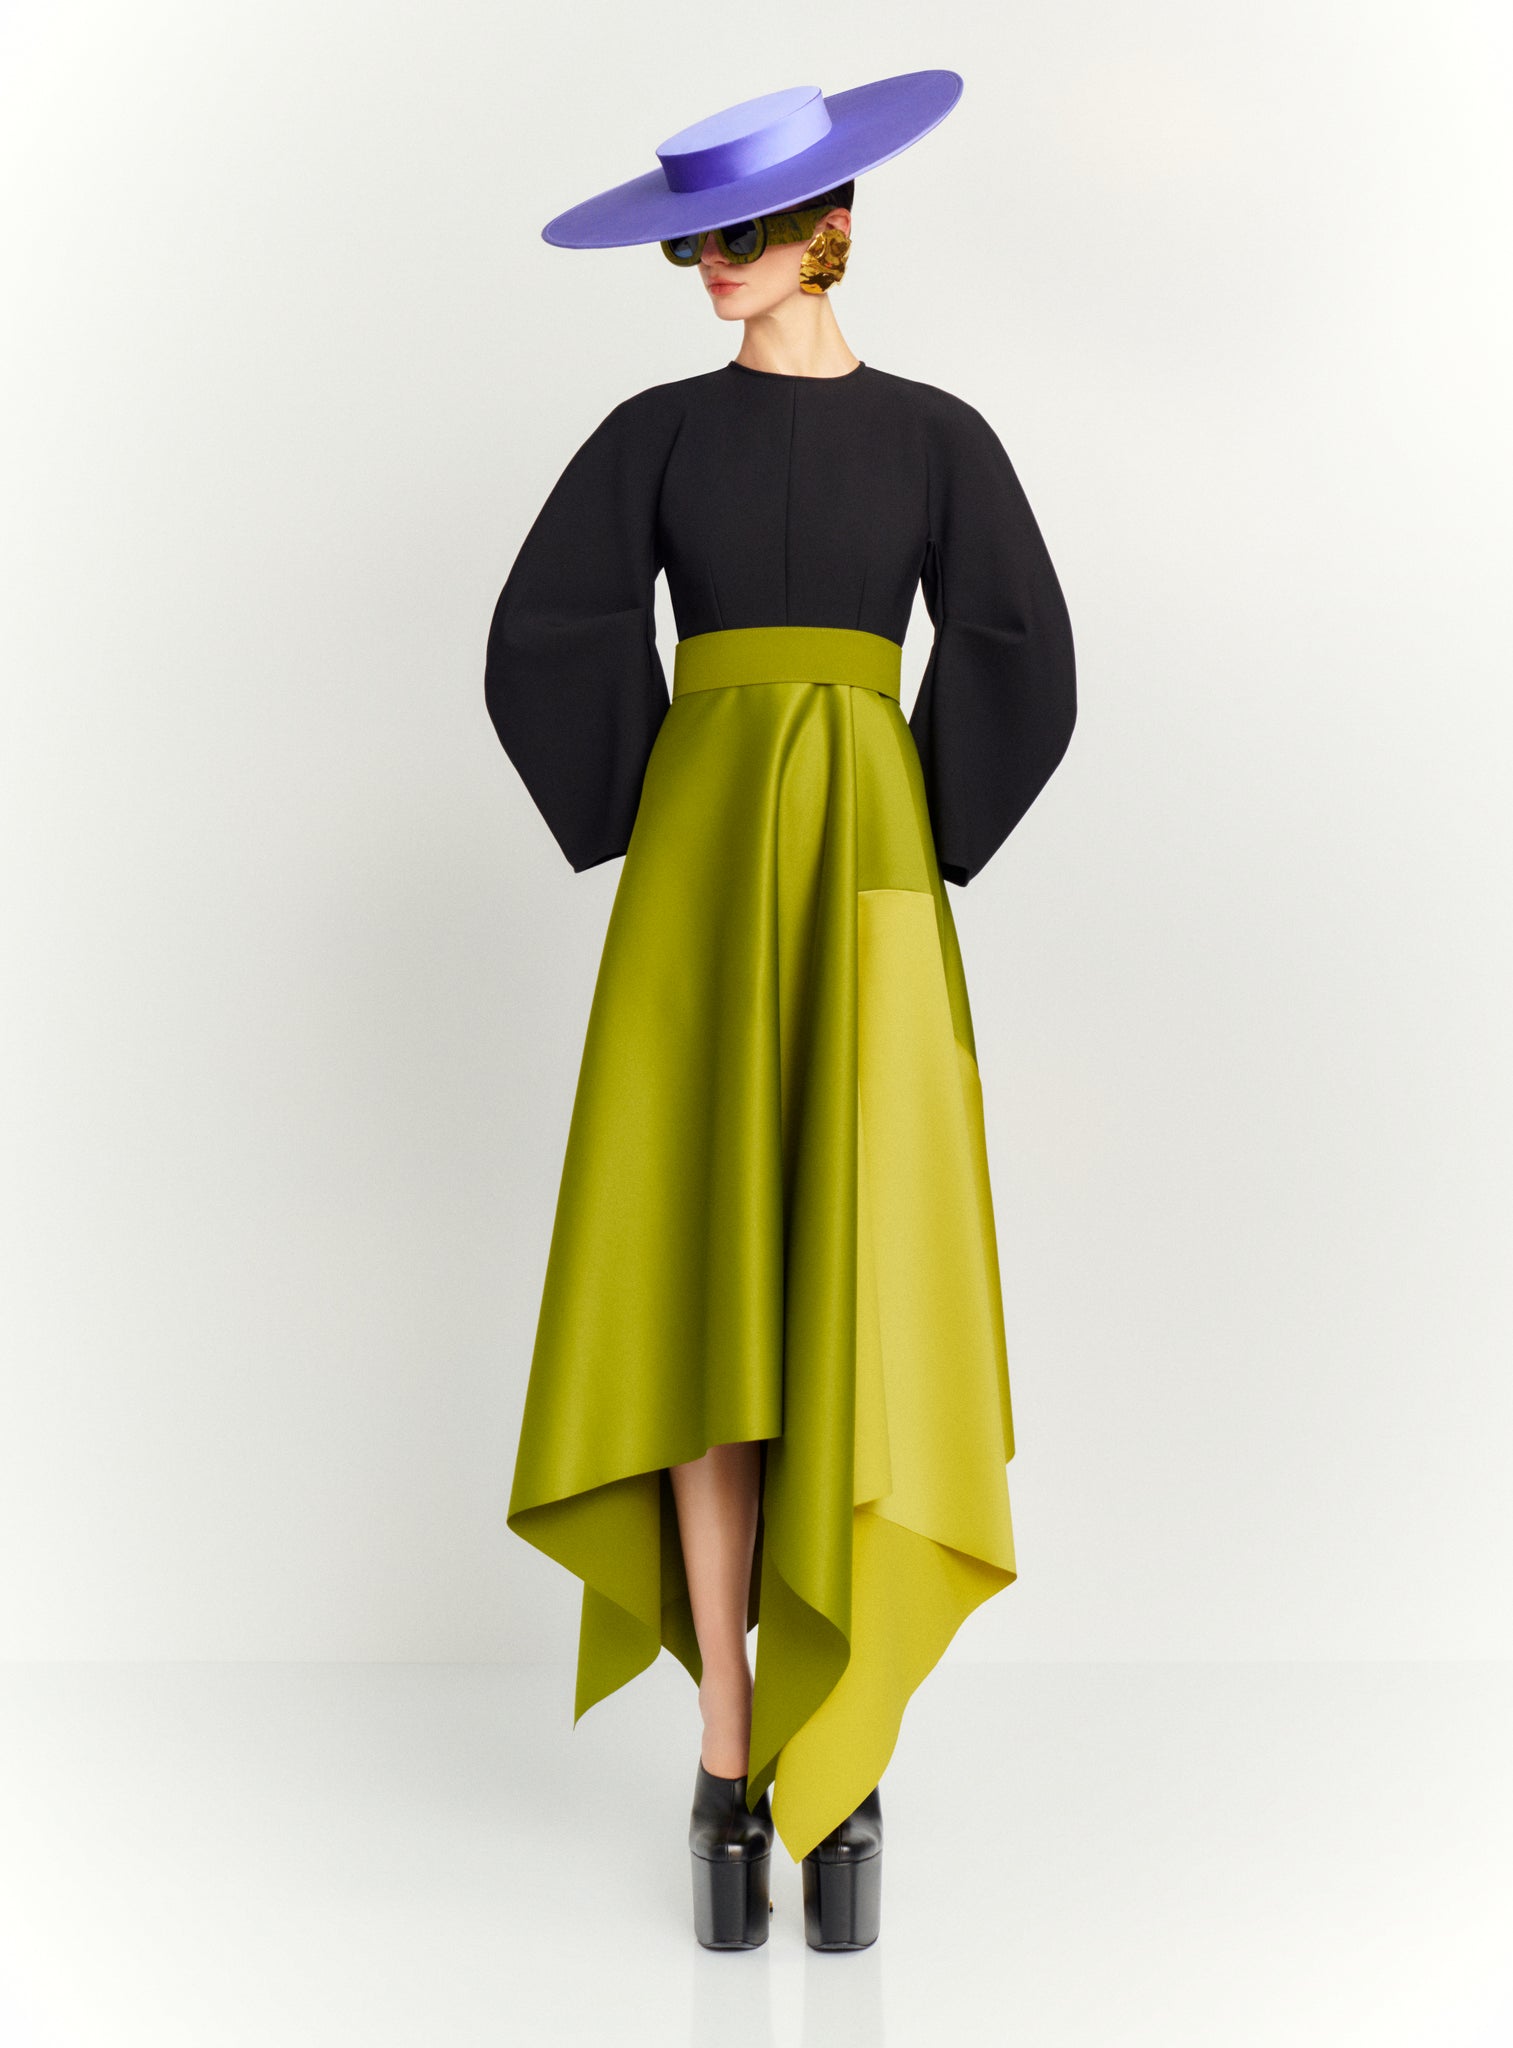 The Quinn Midi Dress in Black, Sweet Pea Green and Chartreuse